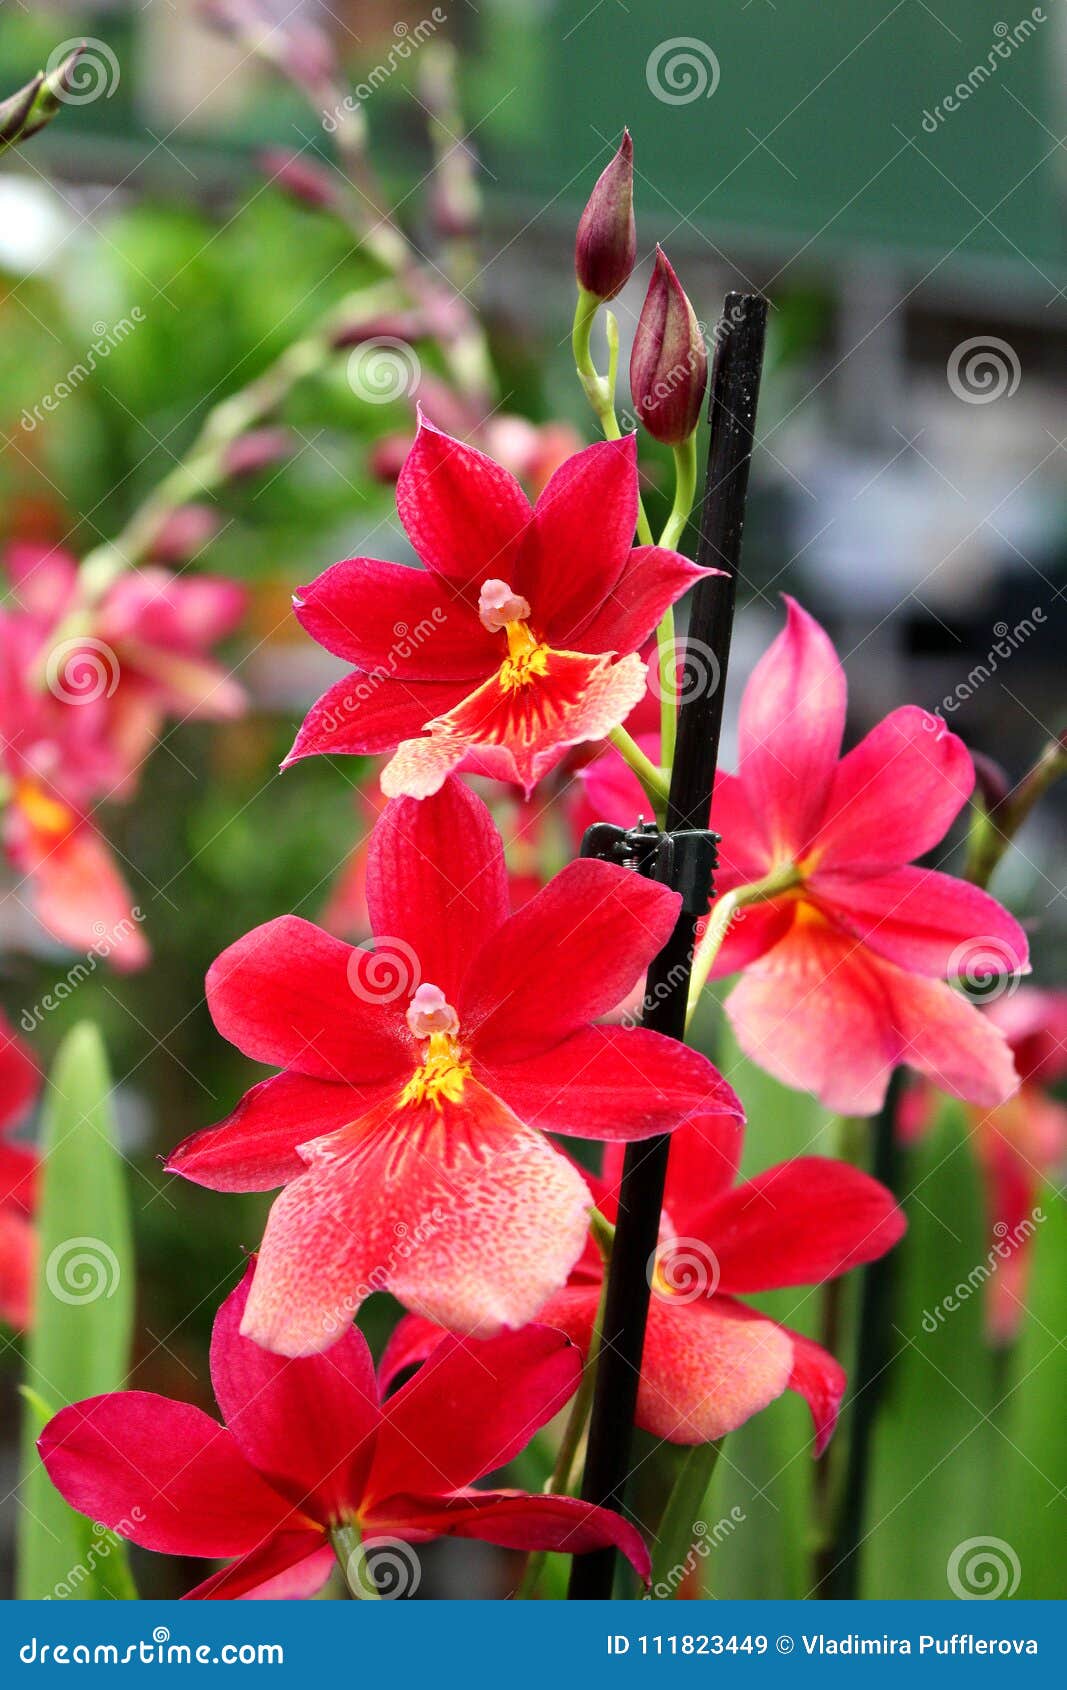 orchid with red flowers - favourite ornamental plant